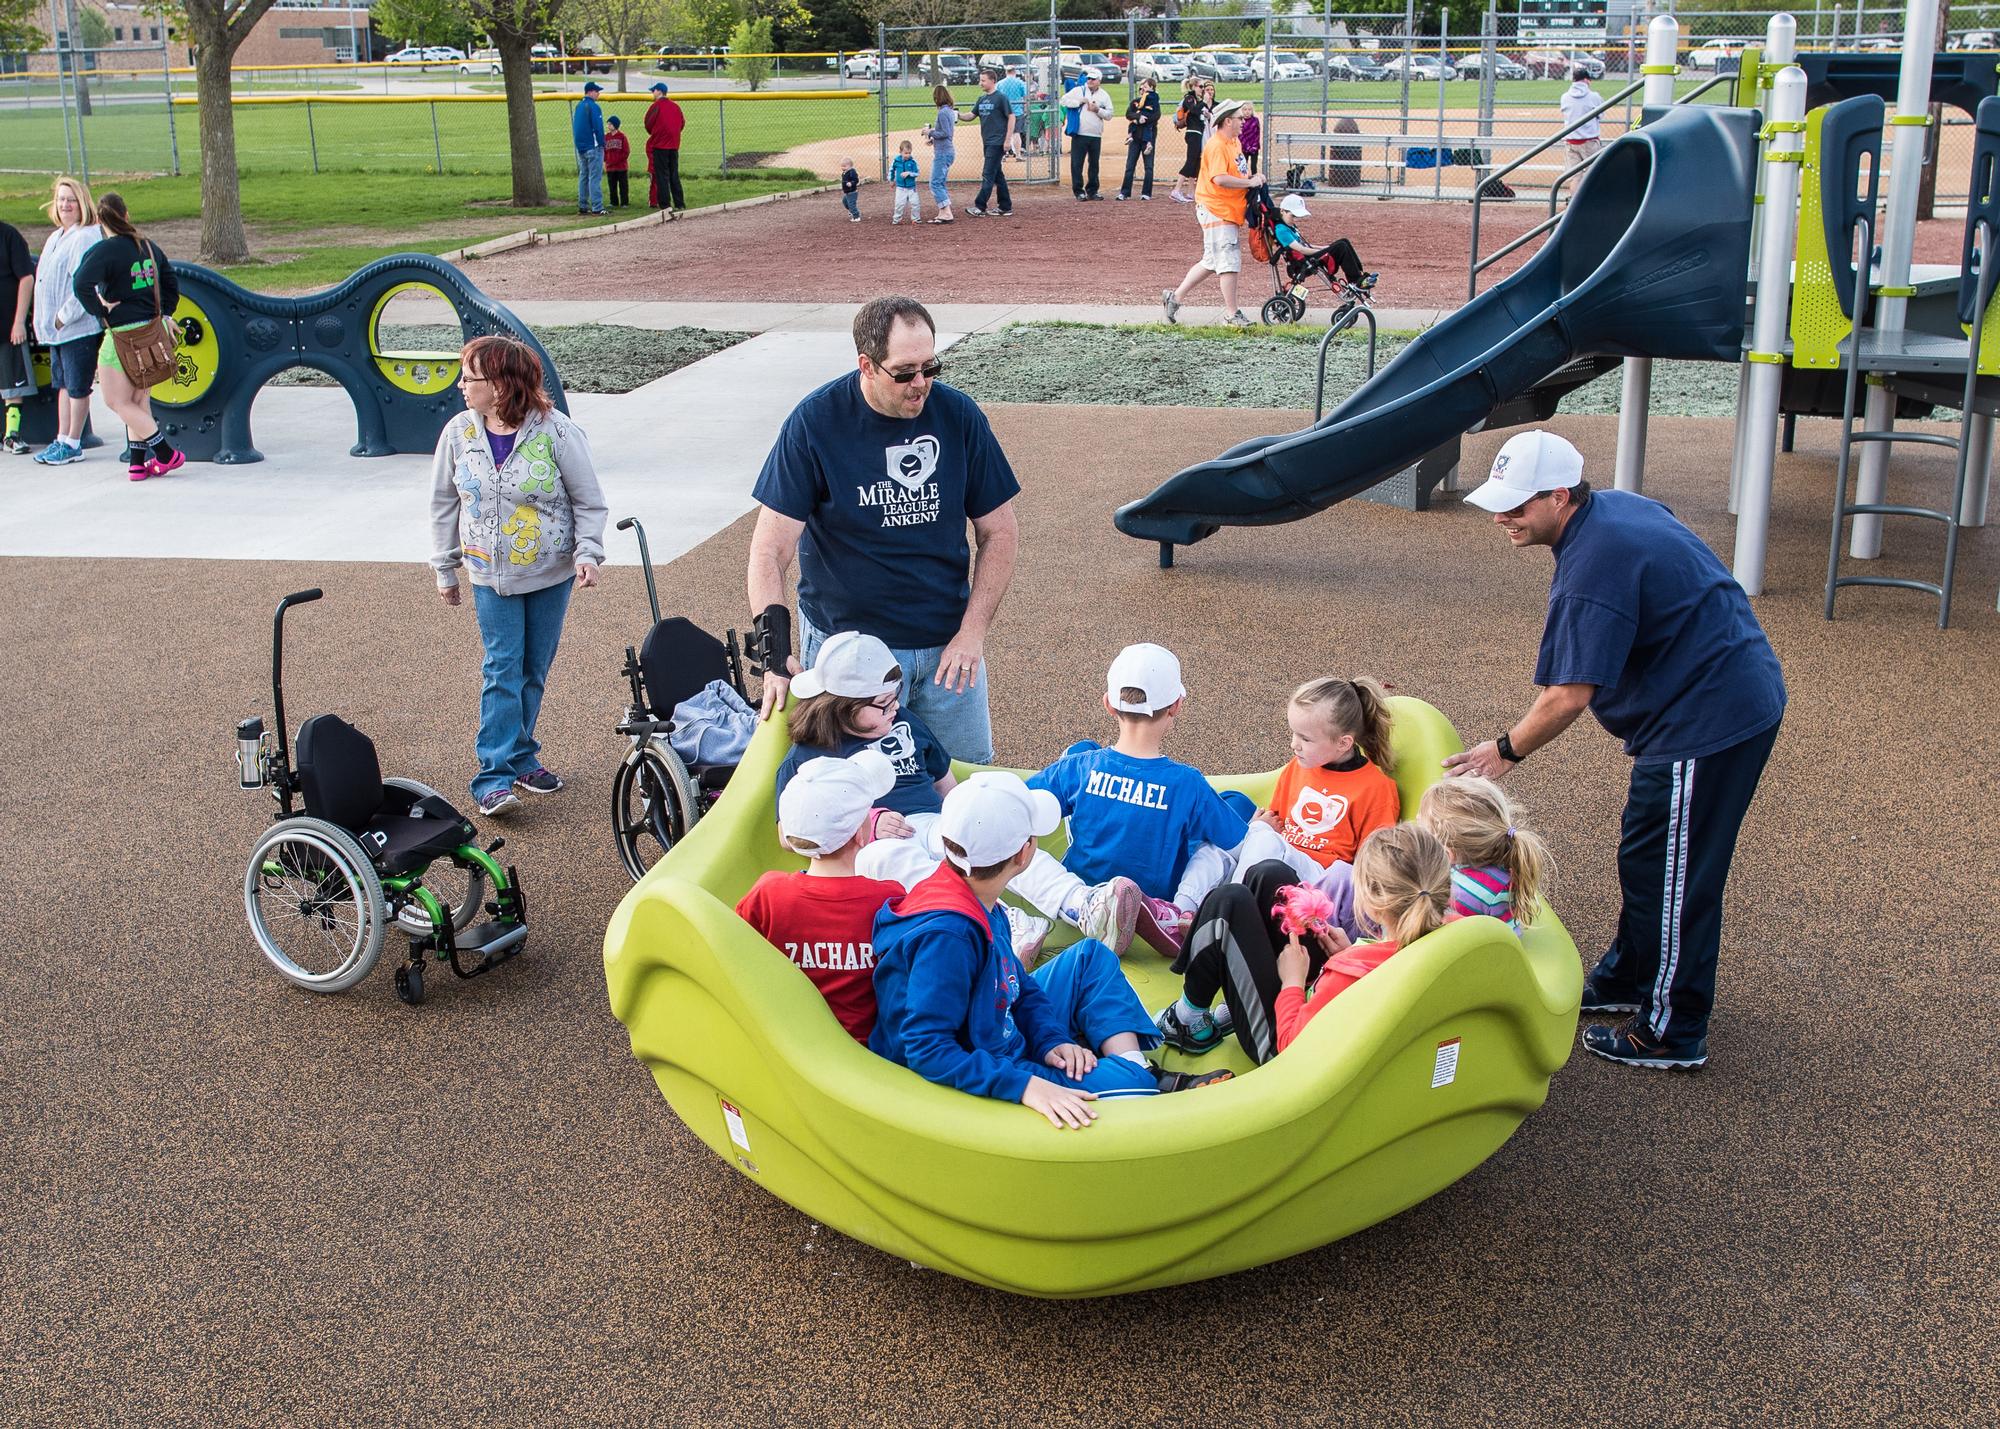 Children with mobility challenges play on adaptive merry-go-round.